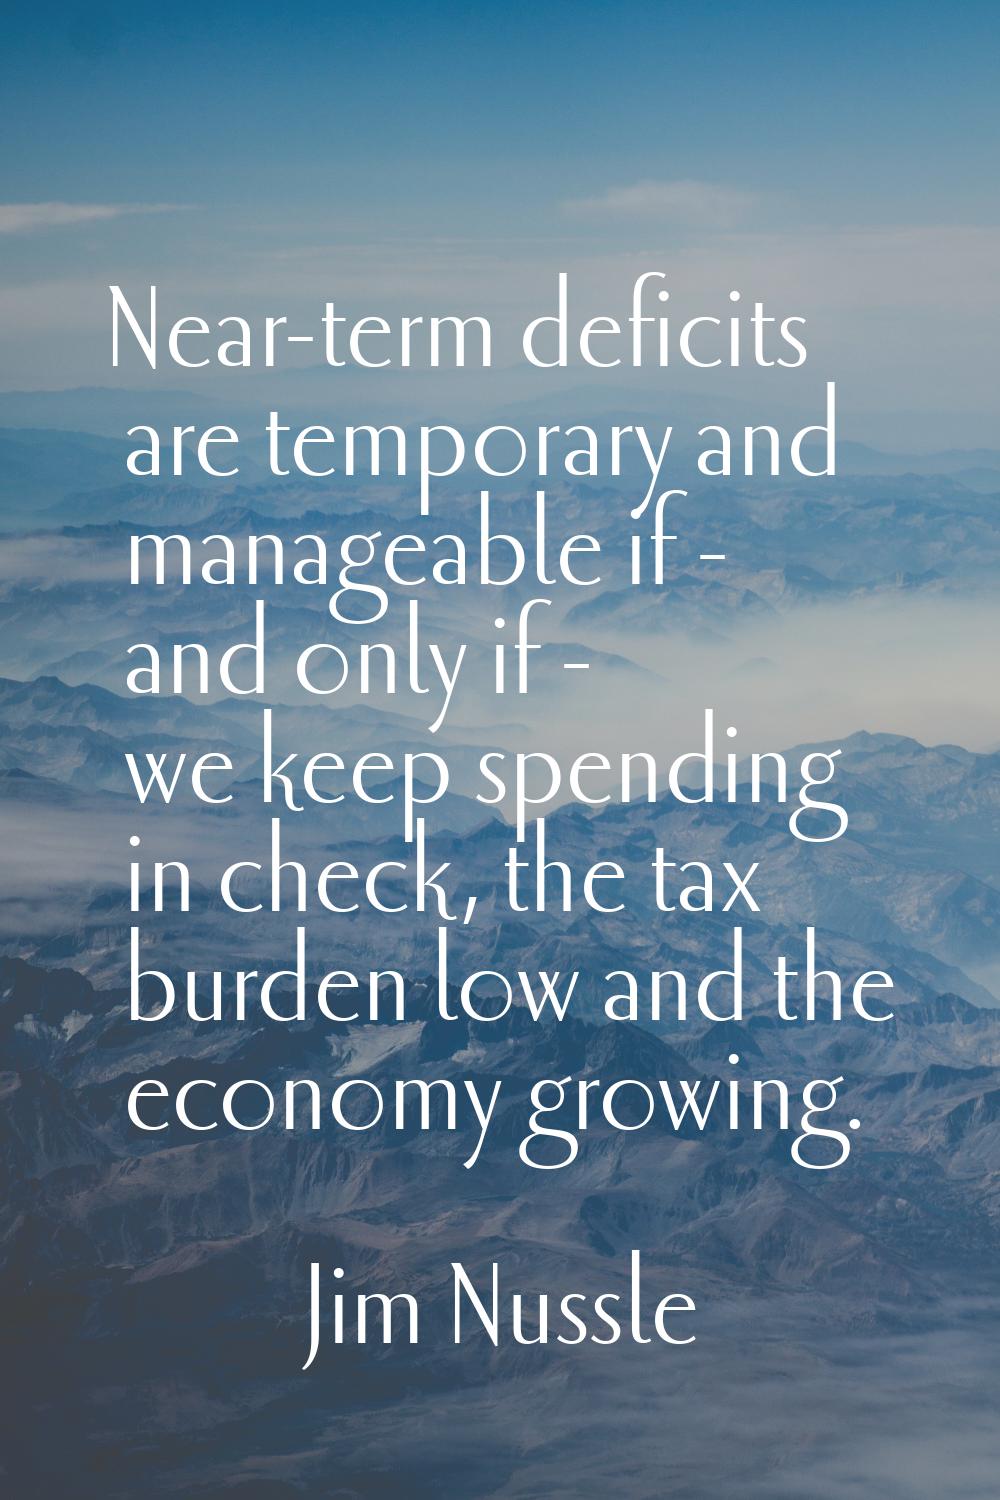 Near-term deficits are temporary and manageable if - and only if - we keep spending in check, the t